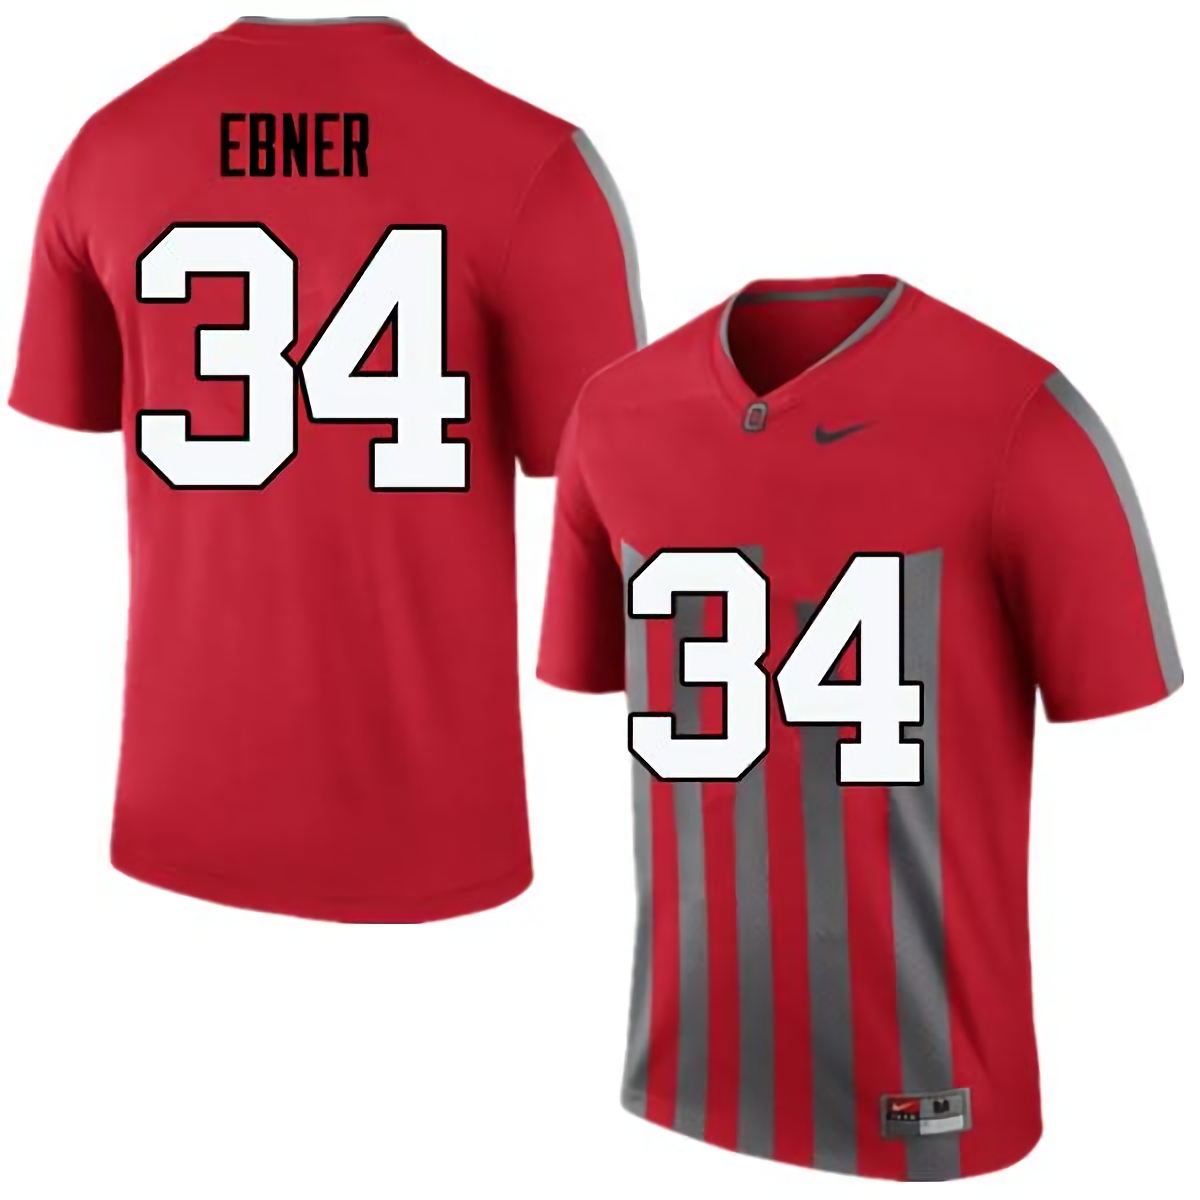 Nate Ebner Ohio State Buckeyes Men's NCAA #34 Nike Throwback Red College Stitched Football Jersey PWG7256GU